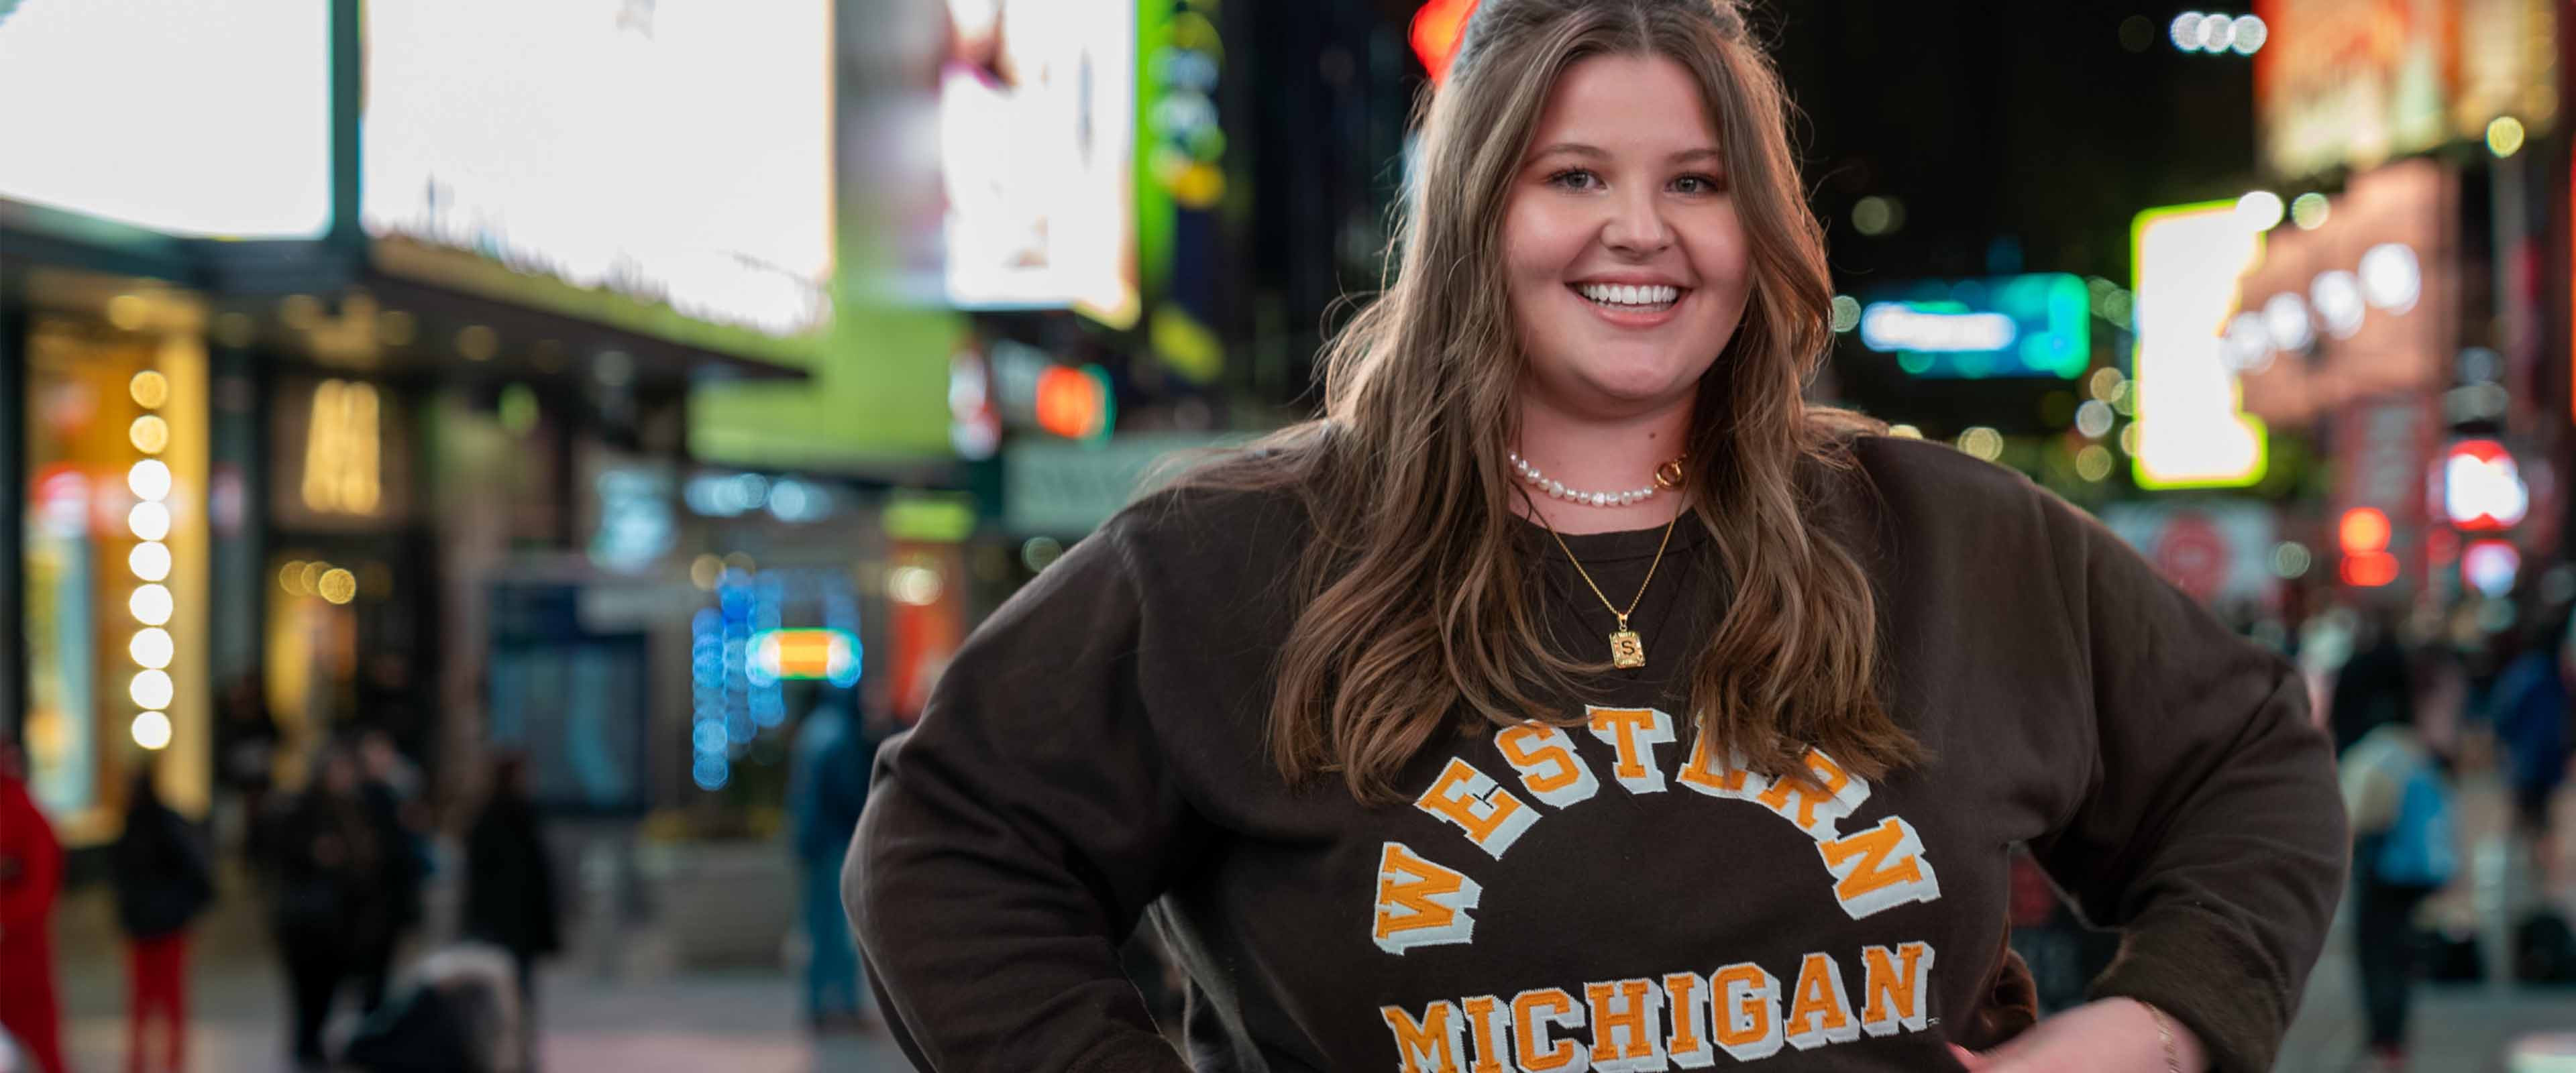 Samantha Morehead posing in her WMU shirt in Times Square.